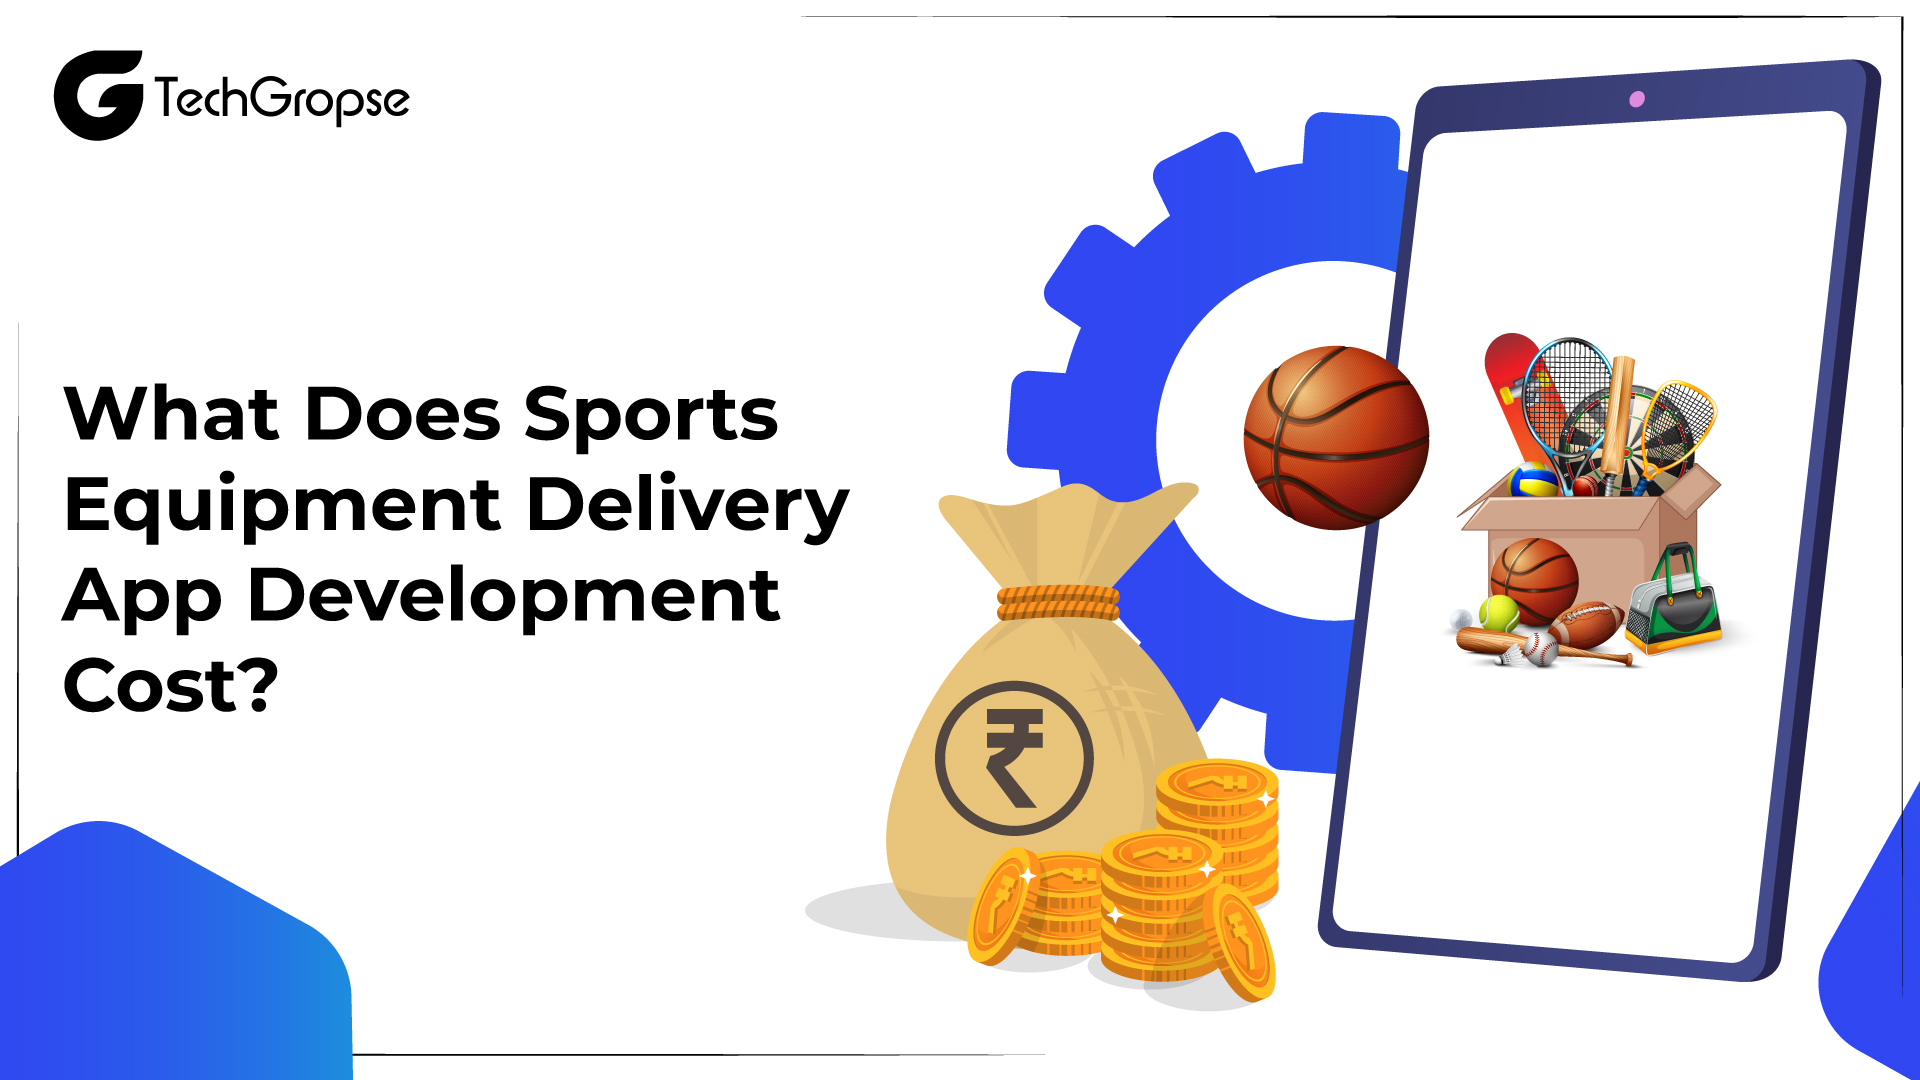 What Does Sports Equipment Delivery App Development Cost?